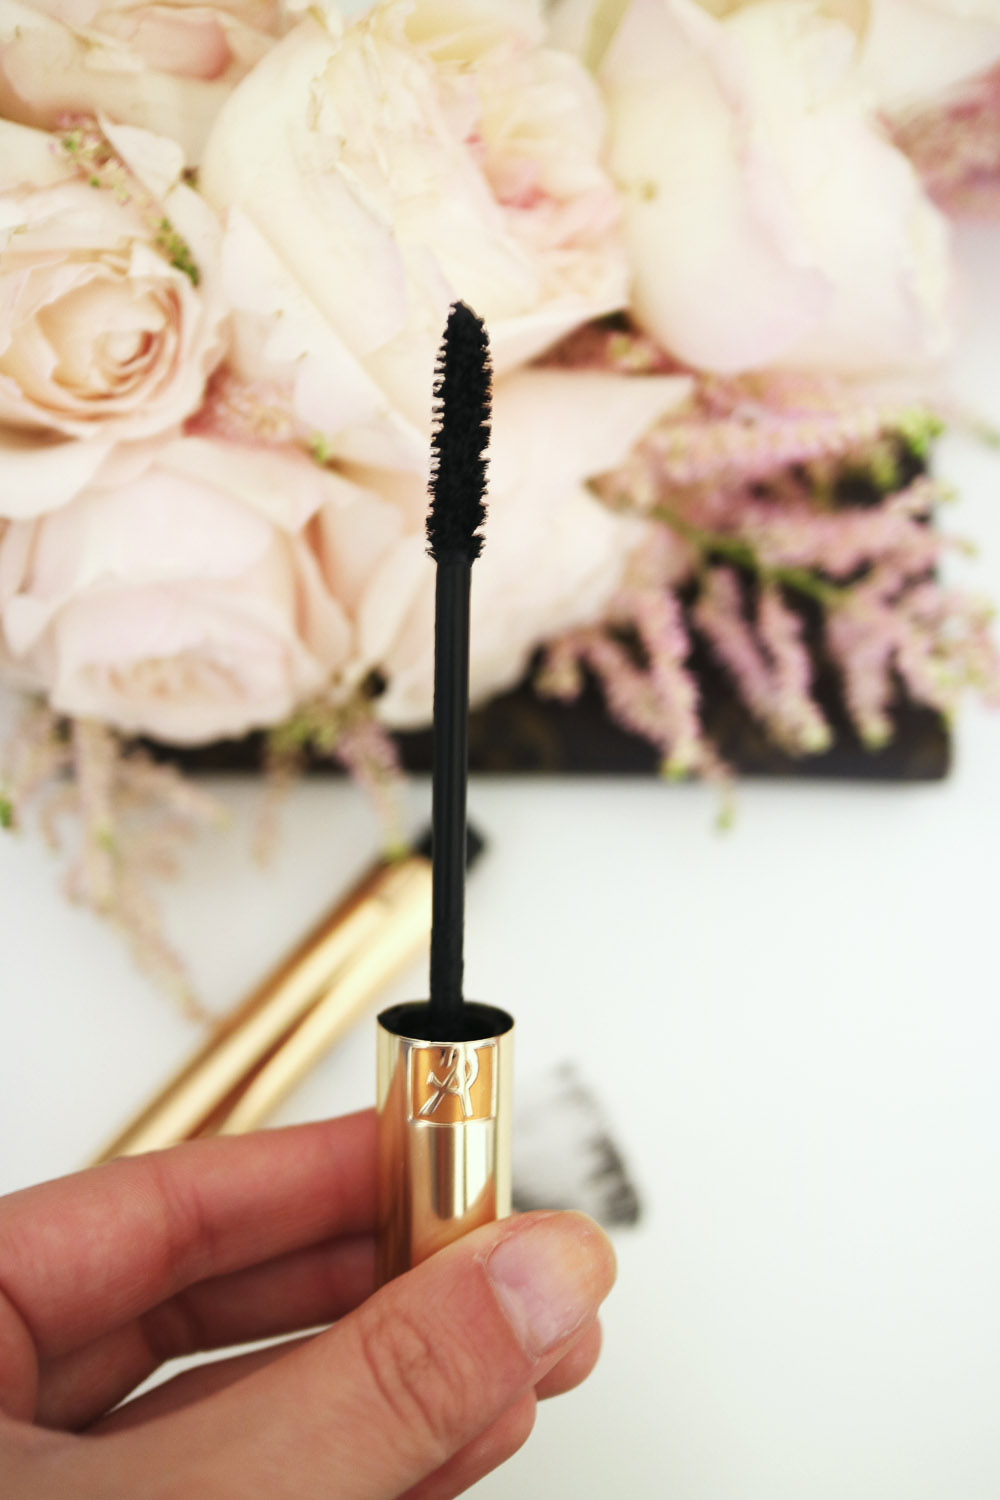 Yves Saint Laurent Mascara Review - the london thing